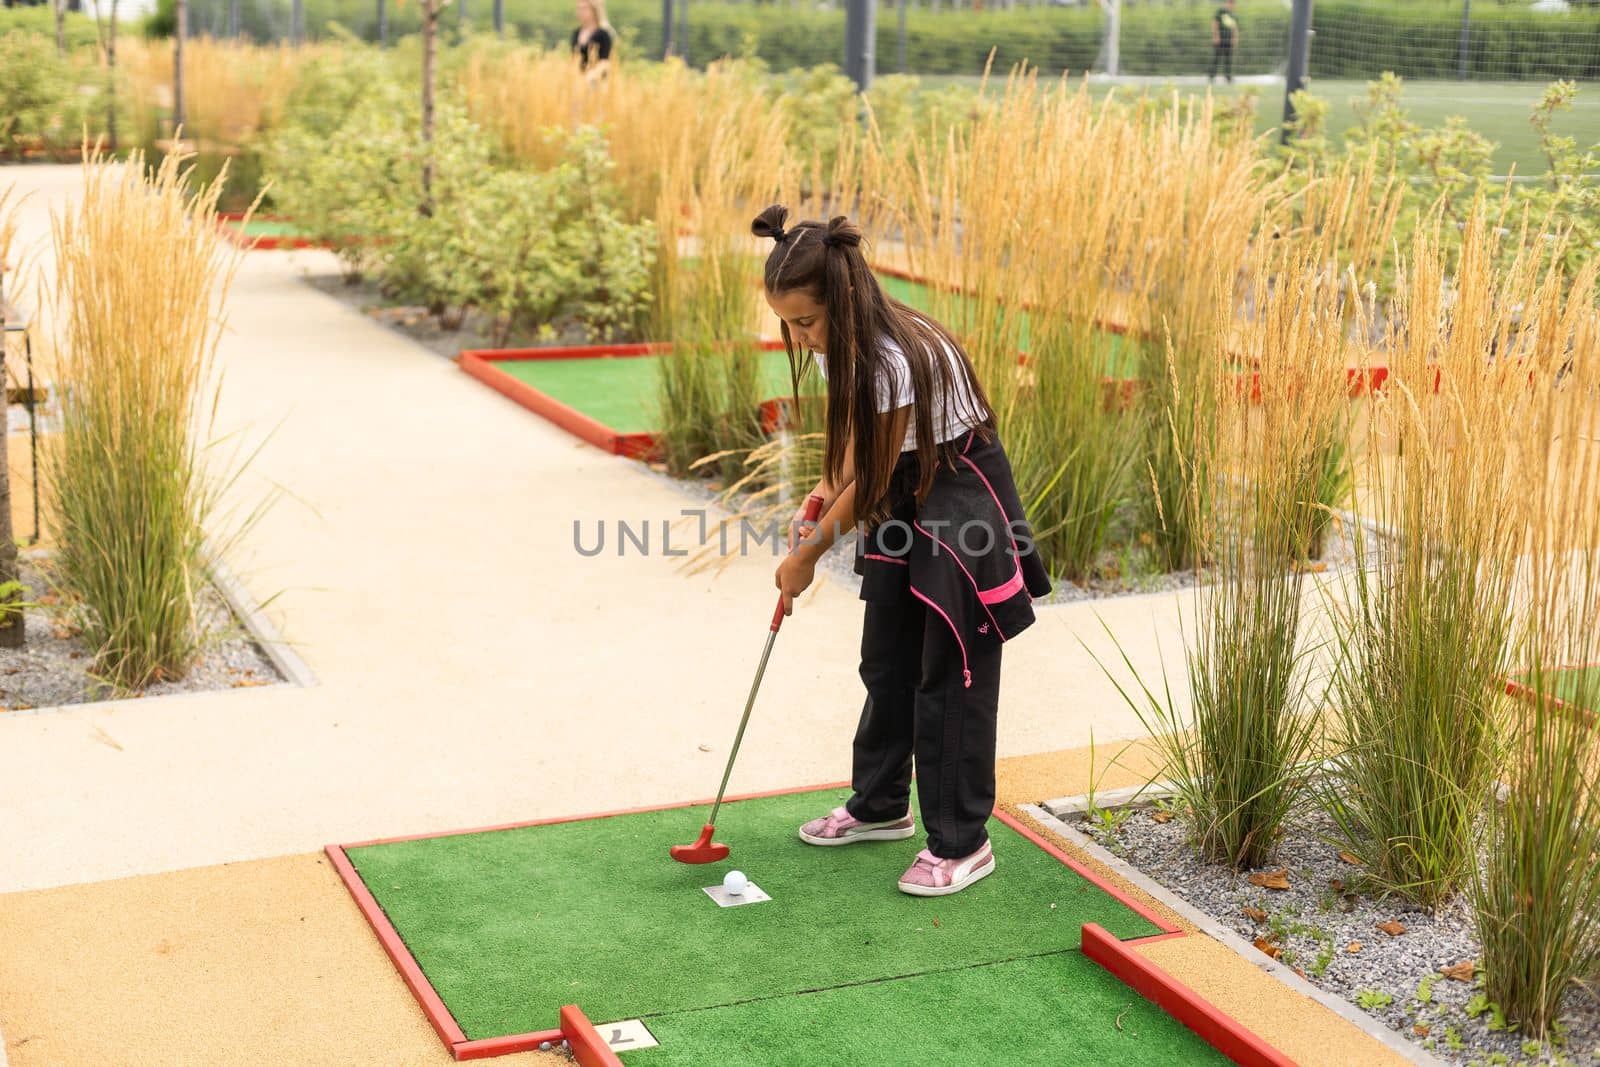 Cute little girl playing mini golf in a park